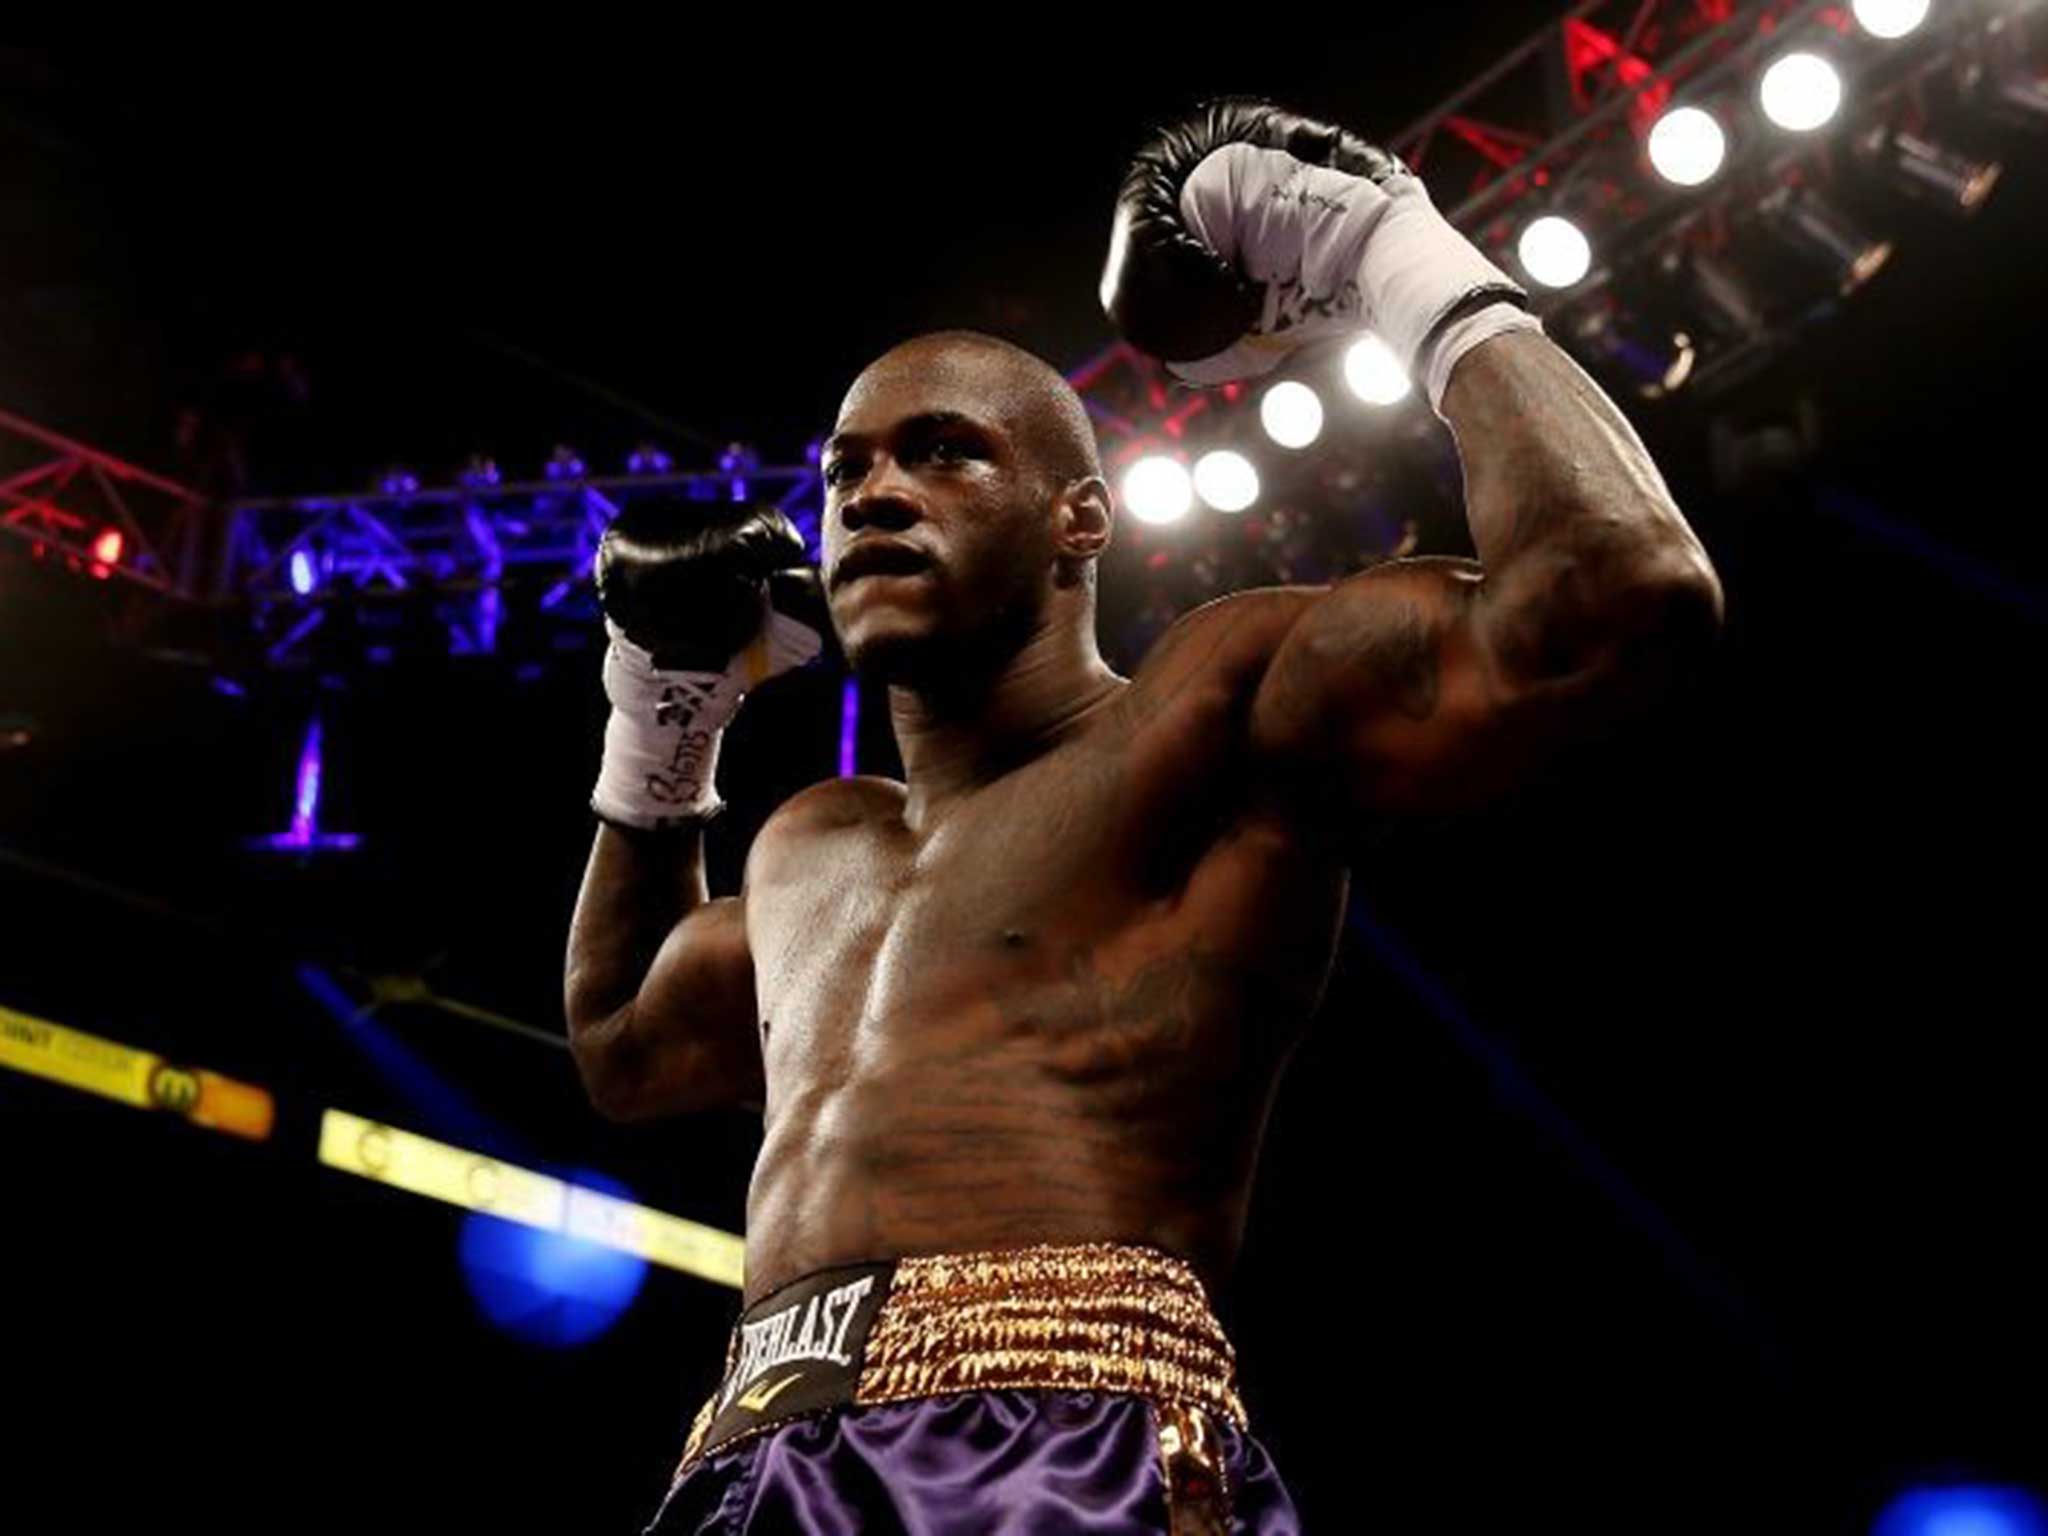 Deontay Wilder will challenge Bermane Stiverne for the WBC title in Las Vegas on 17 January